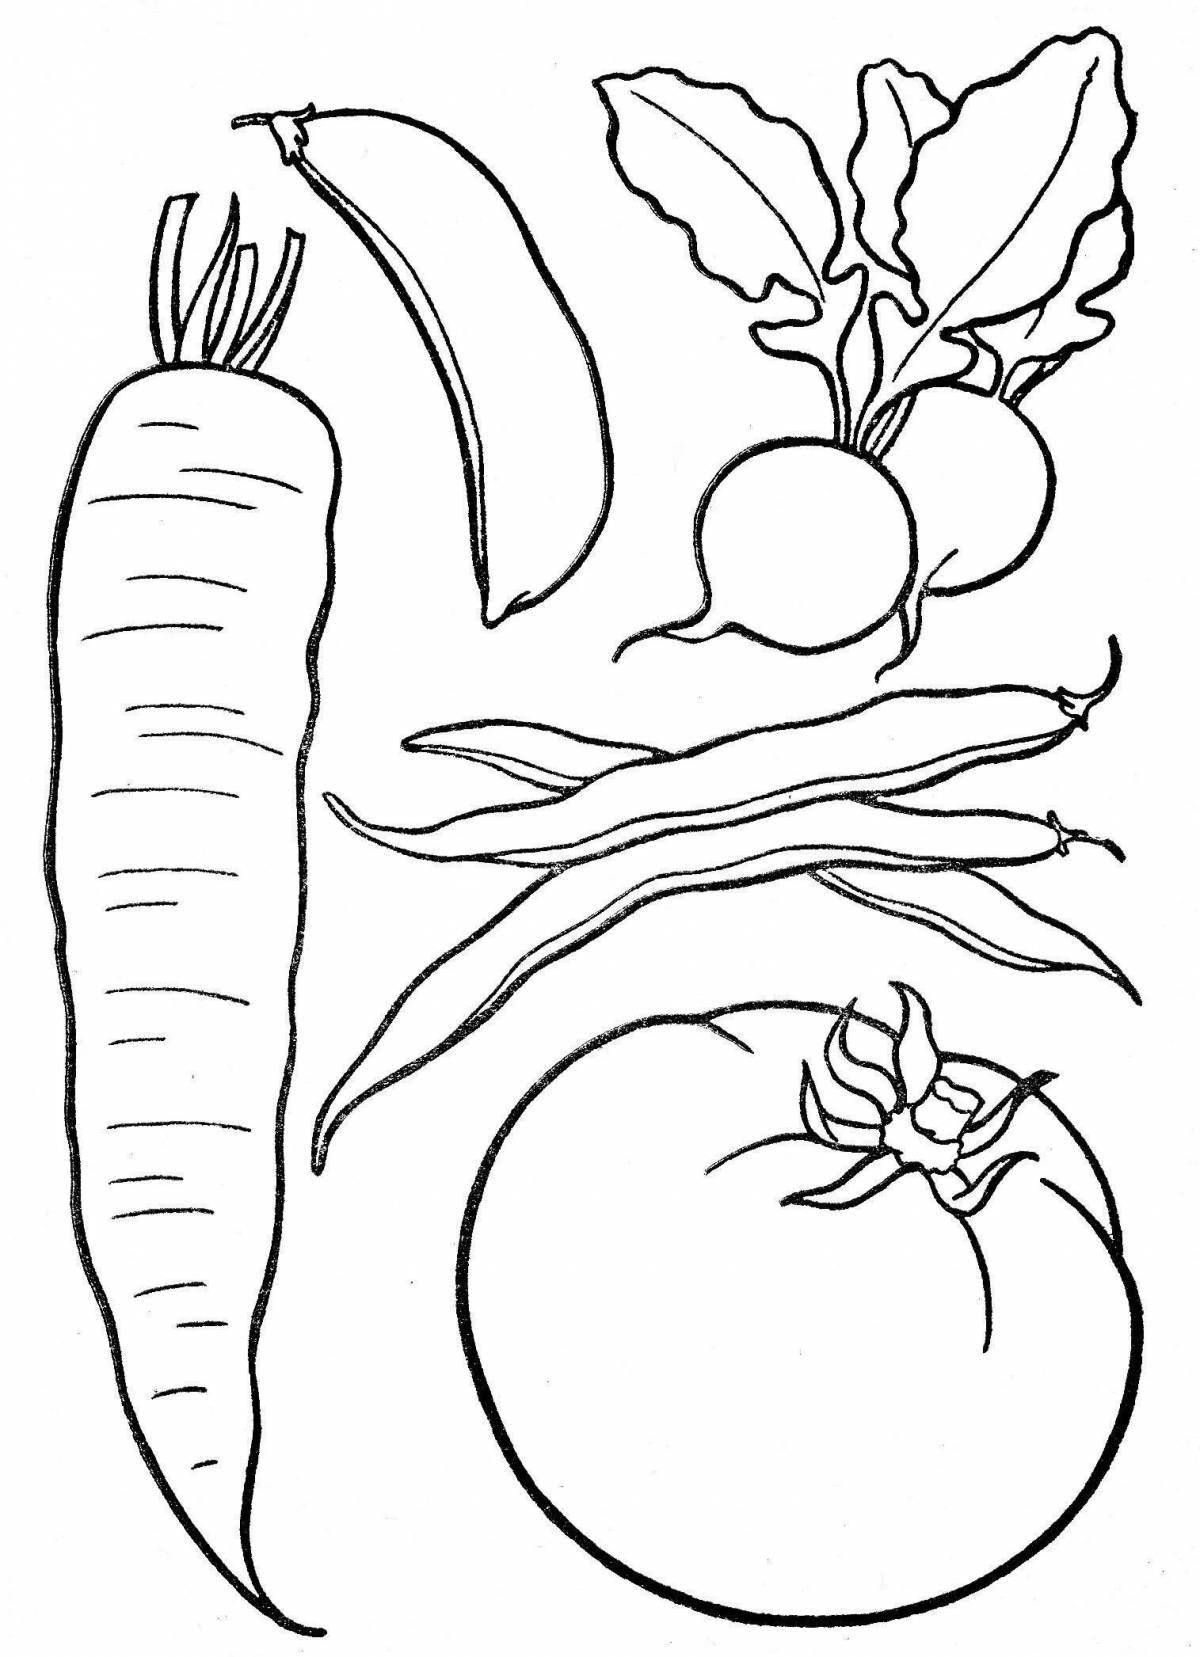 Fabulous cocoonist coloring page